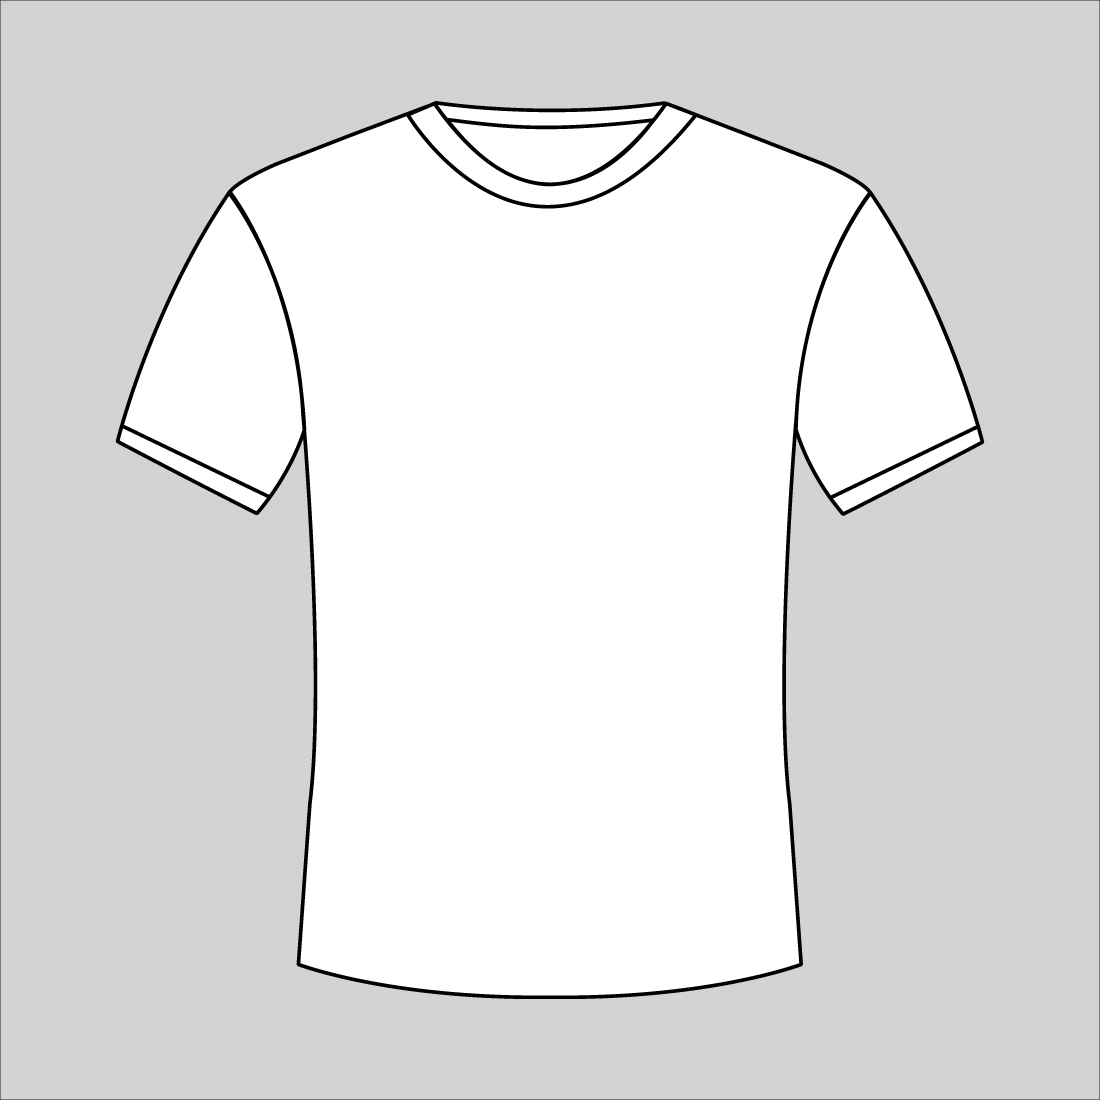 t-shirt-outline-template-museosdelima